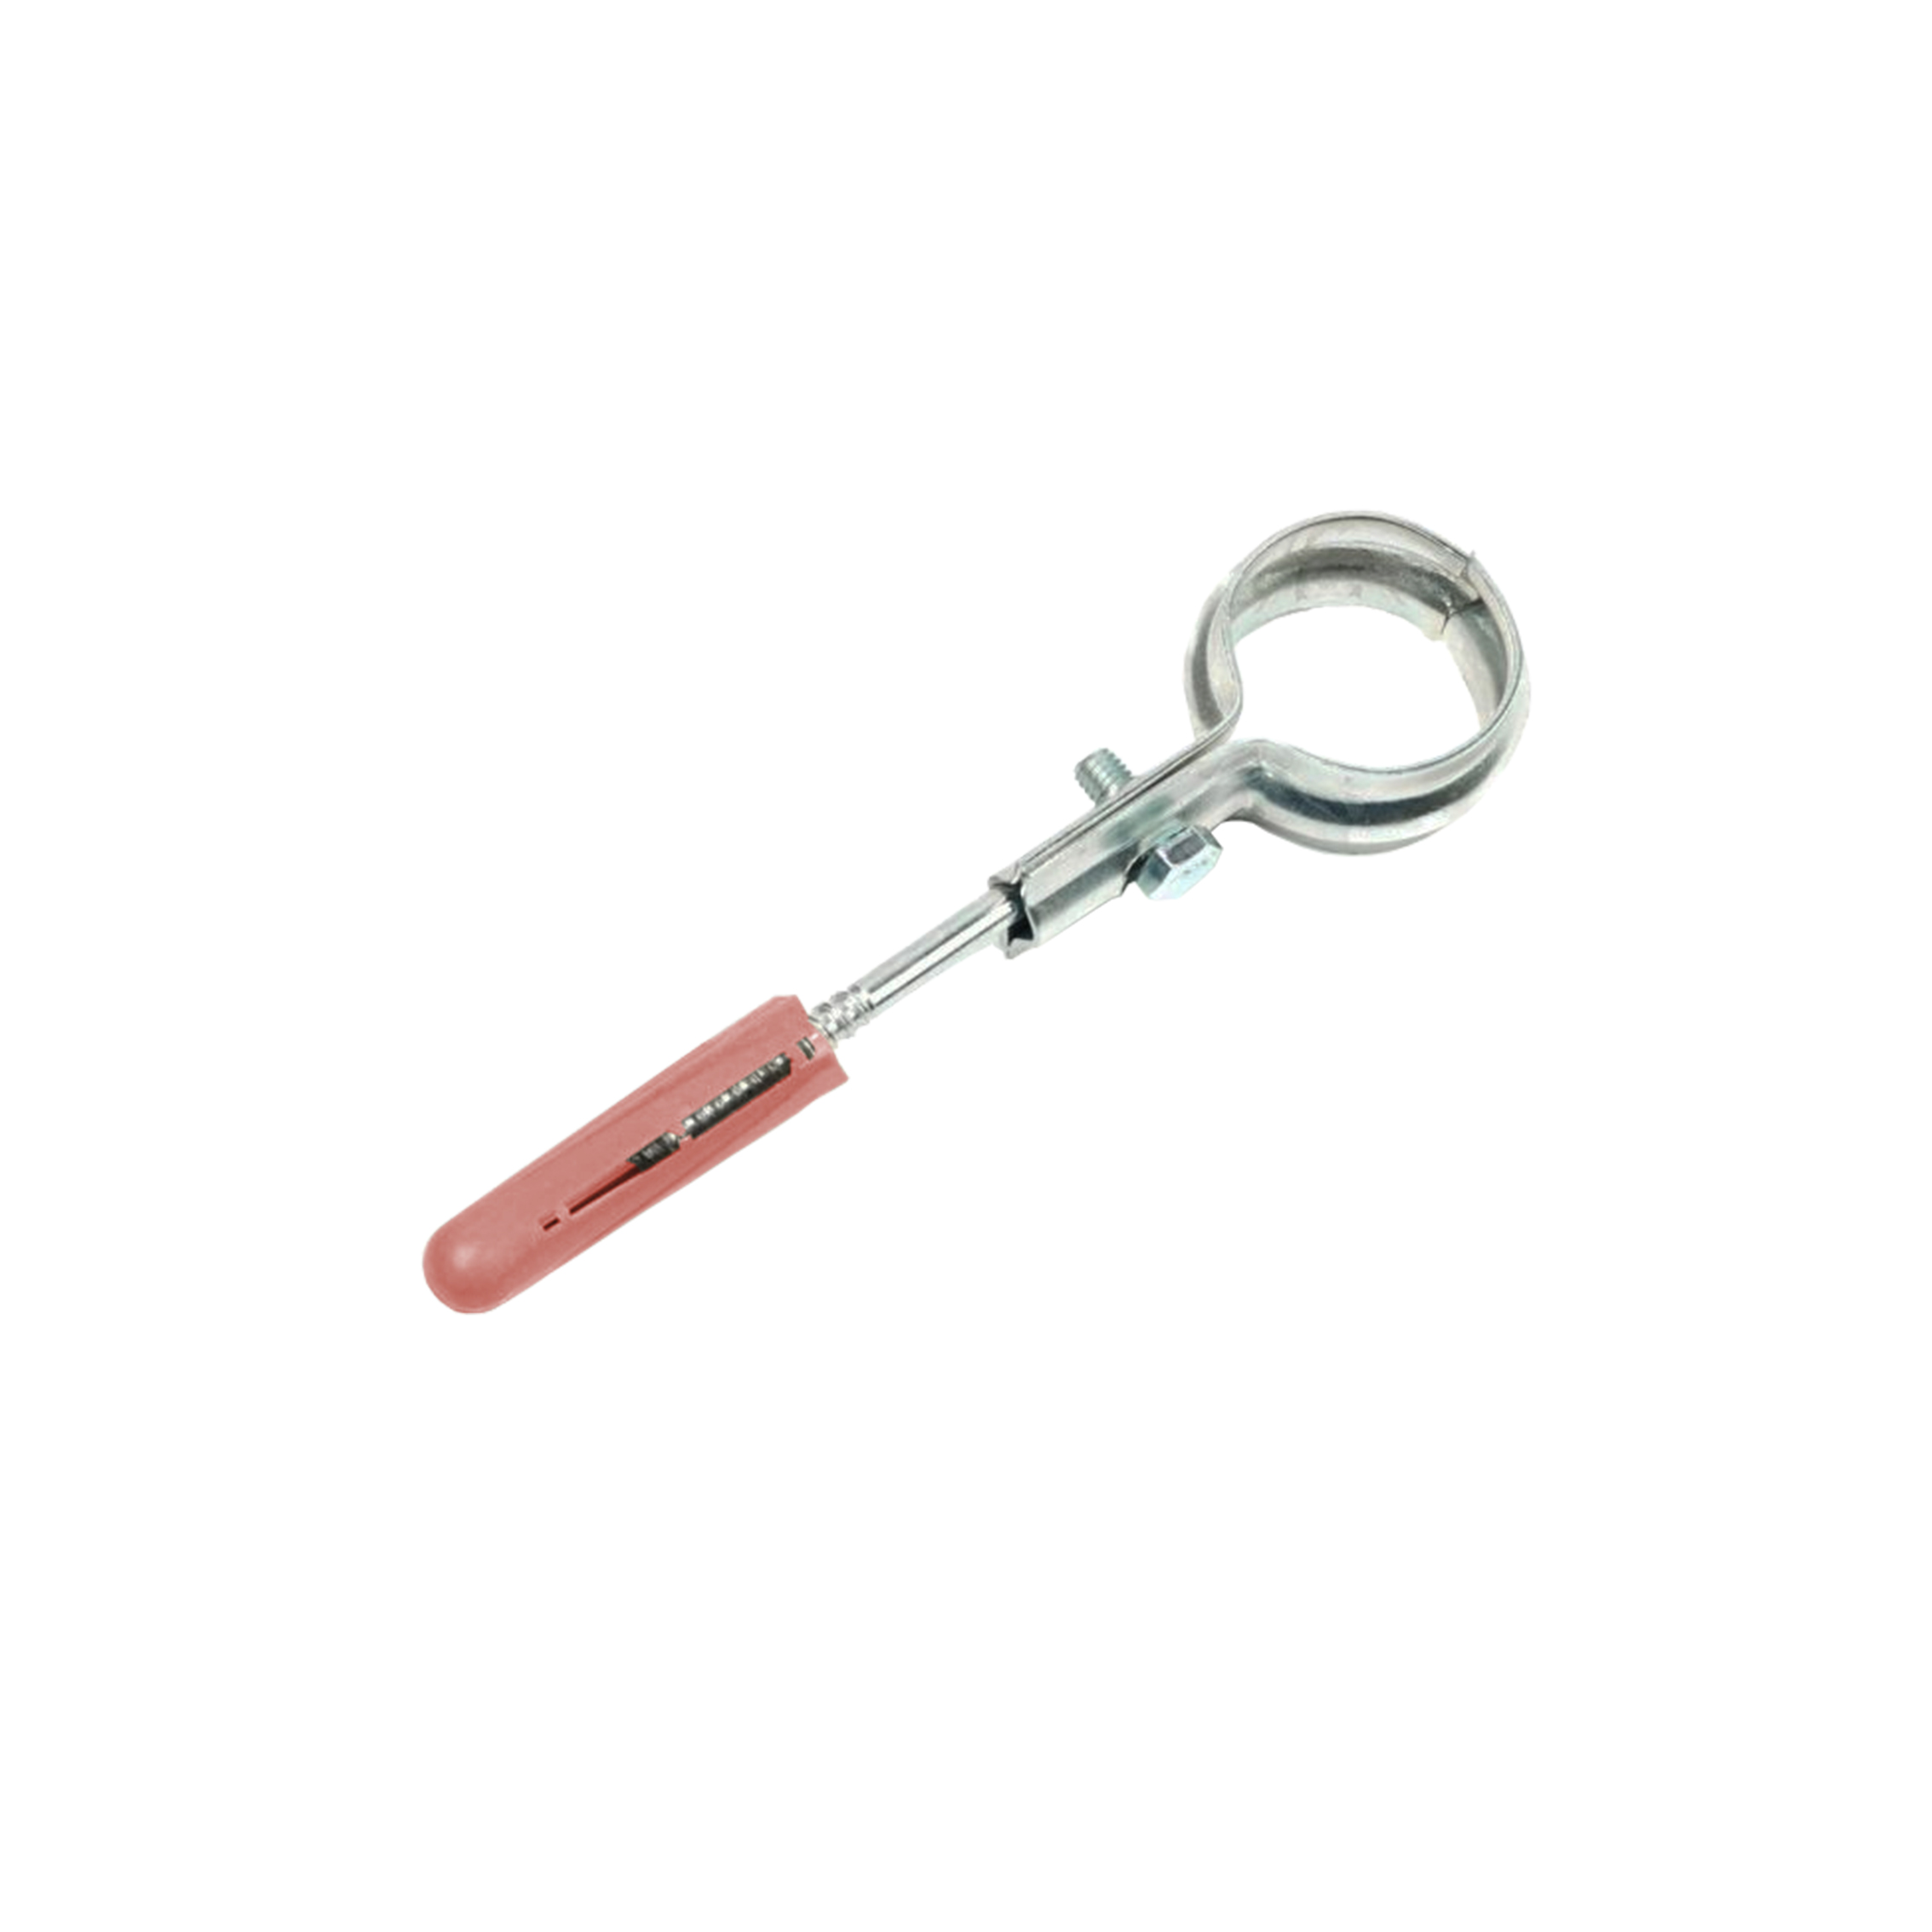 Pipe clamp & hanger bolt with counter nut & anchor (1